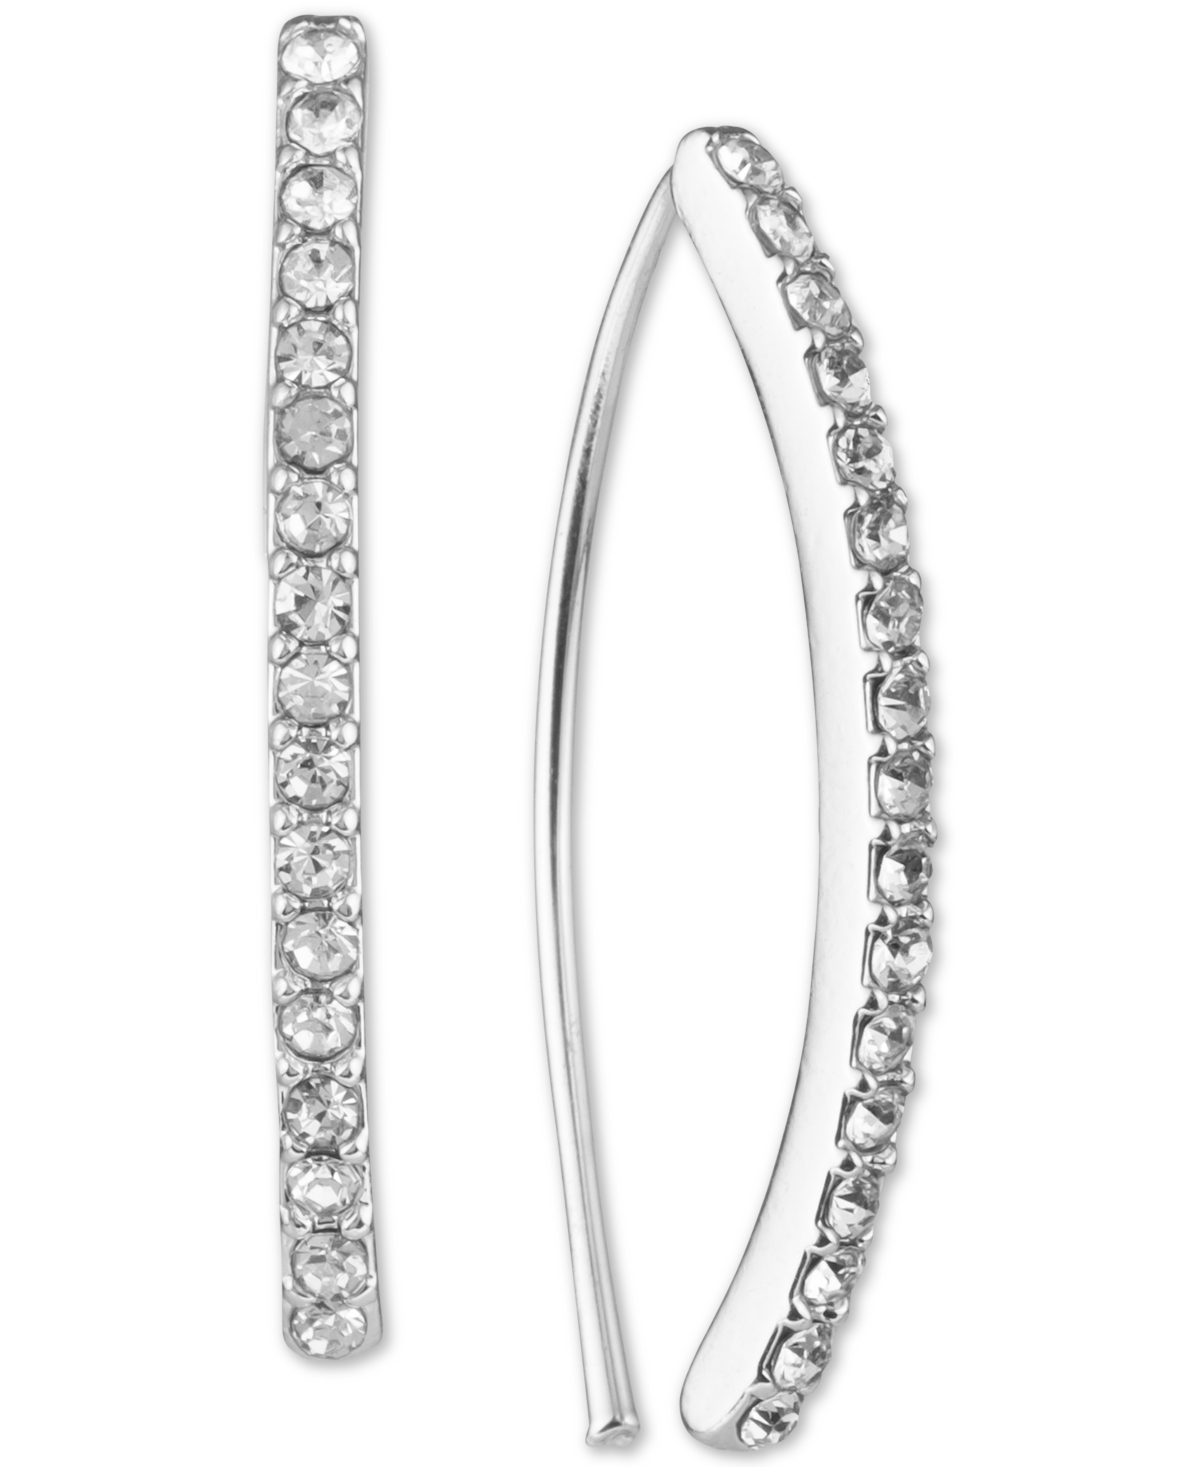 Pave Threader Earrings - Silver